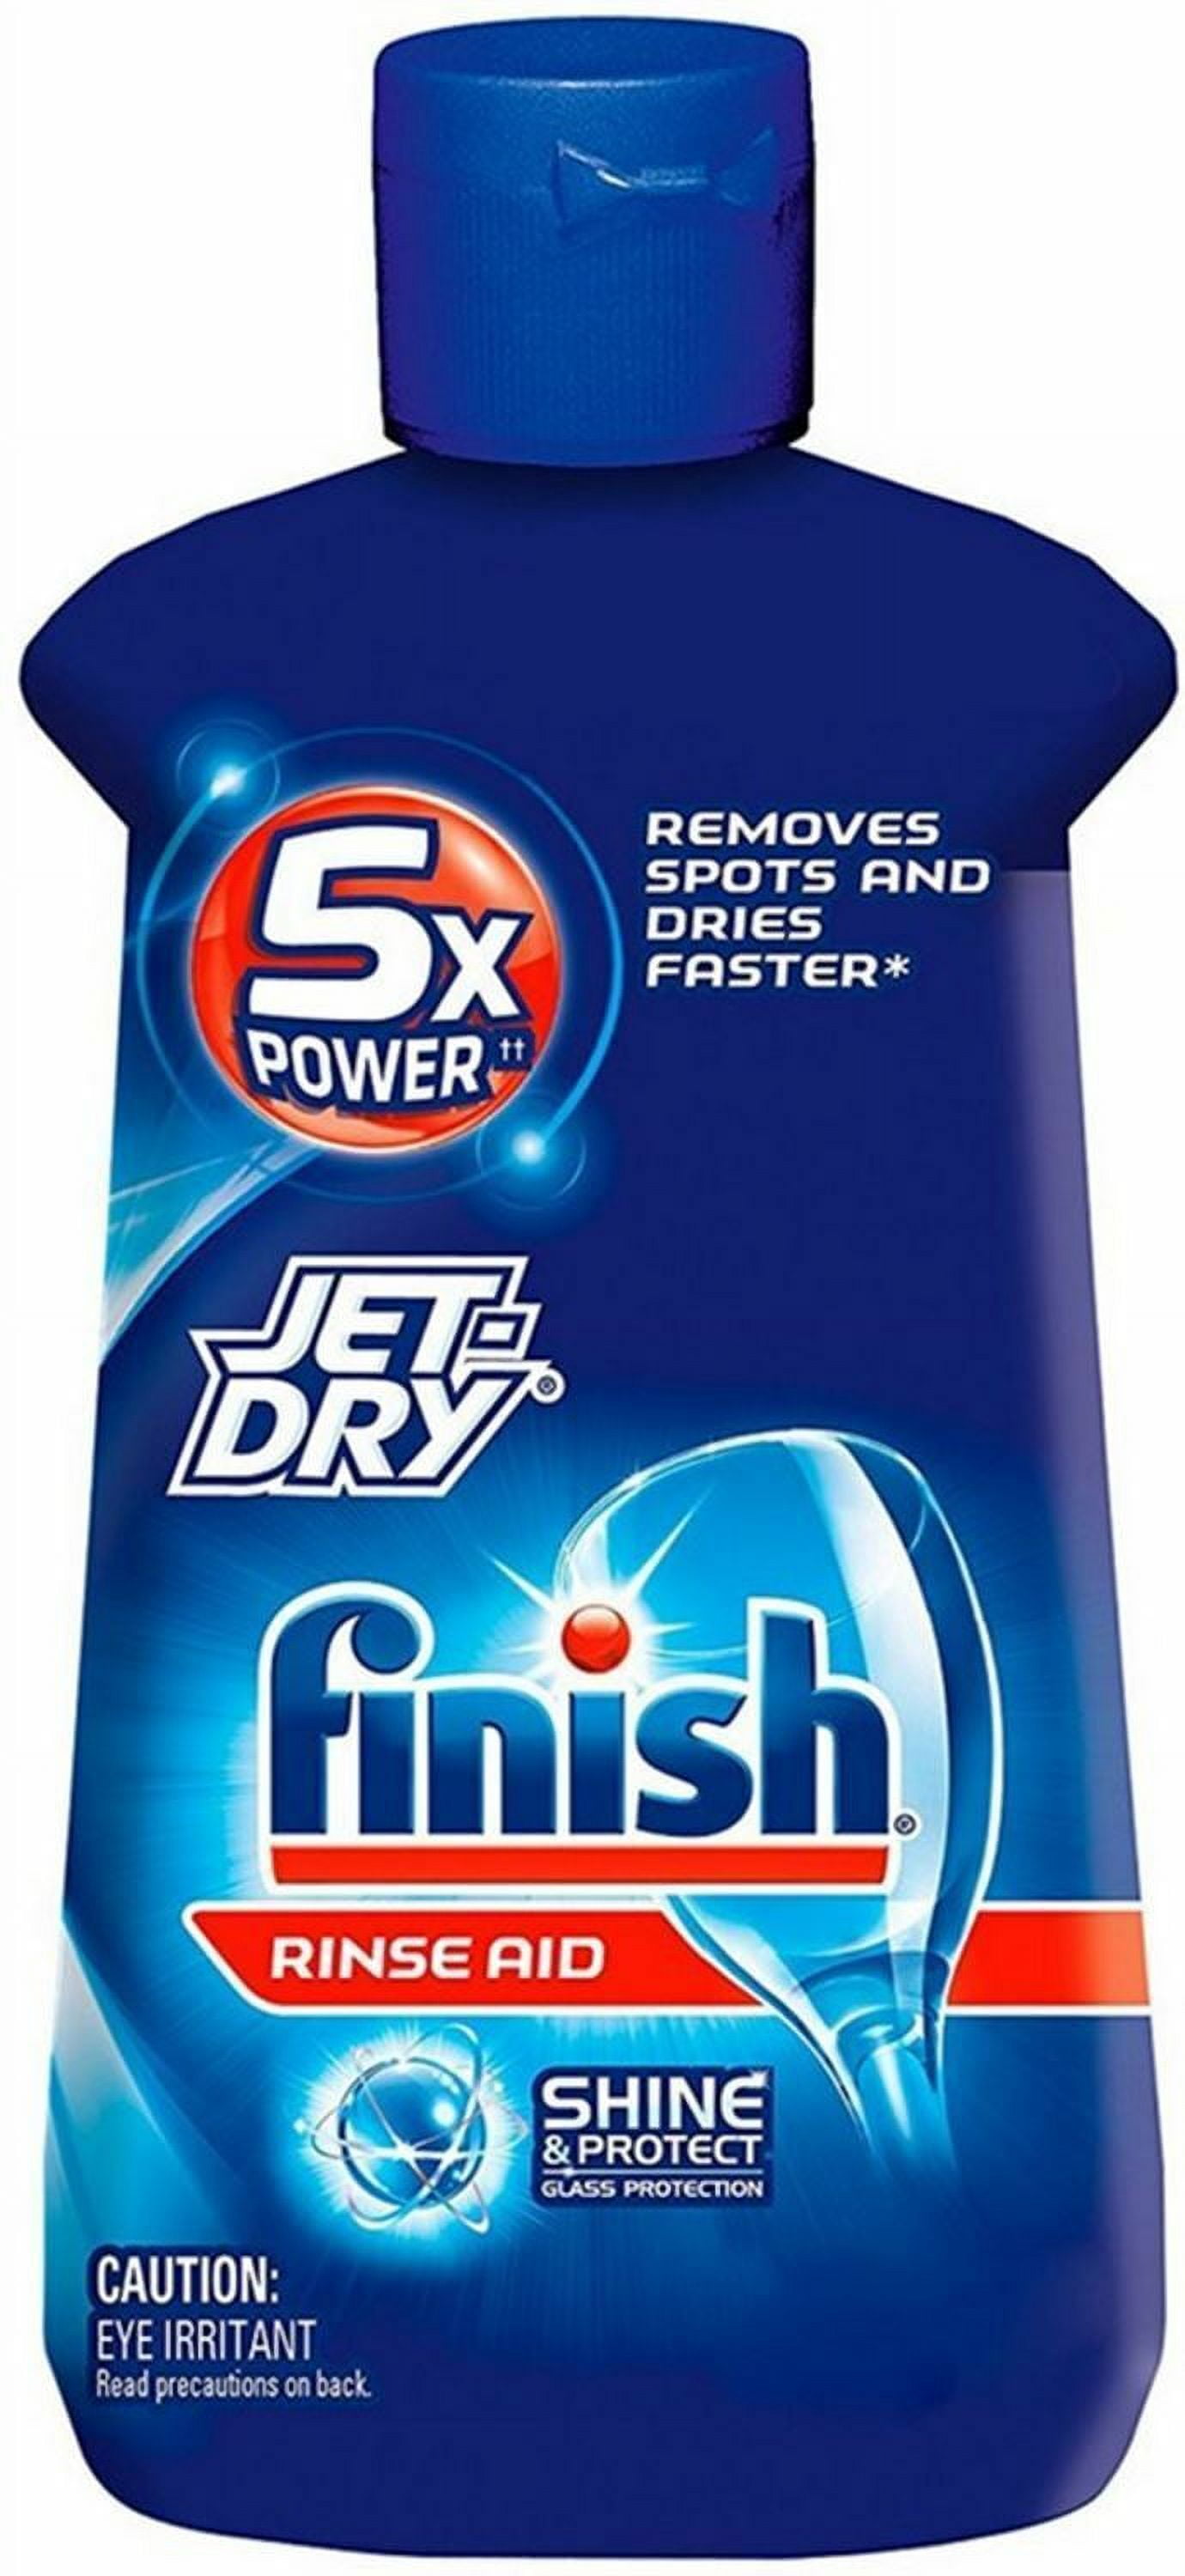 Finish Jet-Dry Rinse Aid-16oz. (155 Washes)-Rinses, Dries